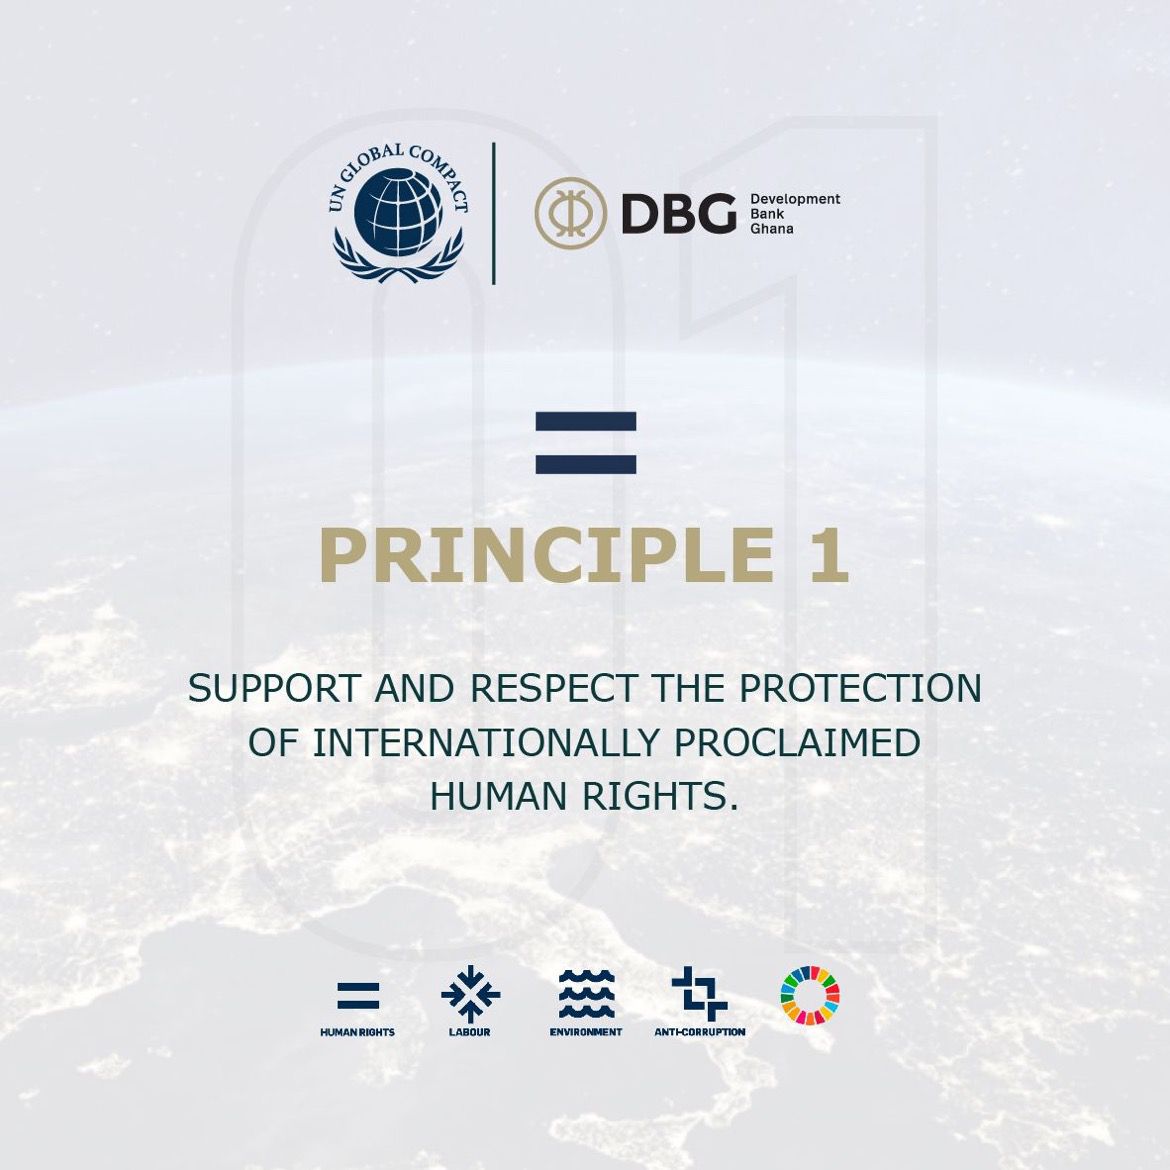 Being a member of the @globalcompact reiterates @devbankghana 's commitment to responsible business practices and sustainable growth. We embrace the principles set by the @UnitedNations for well-being of our planet and society. @globalcompactgh  
#dbg
#unitingbusiness